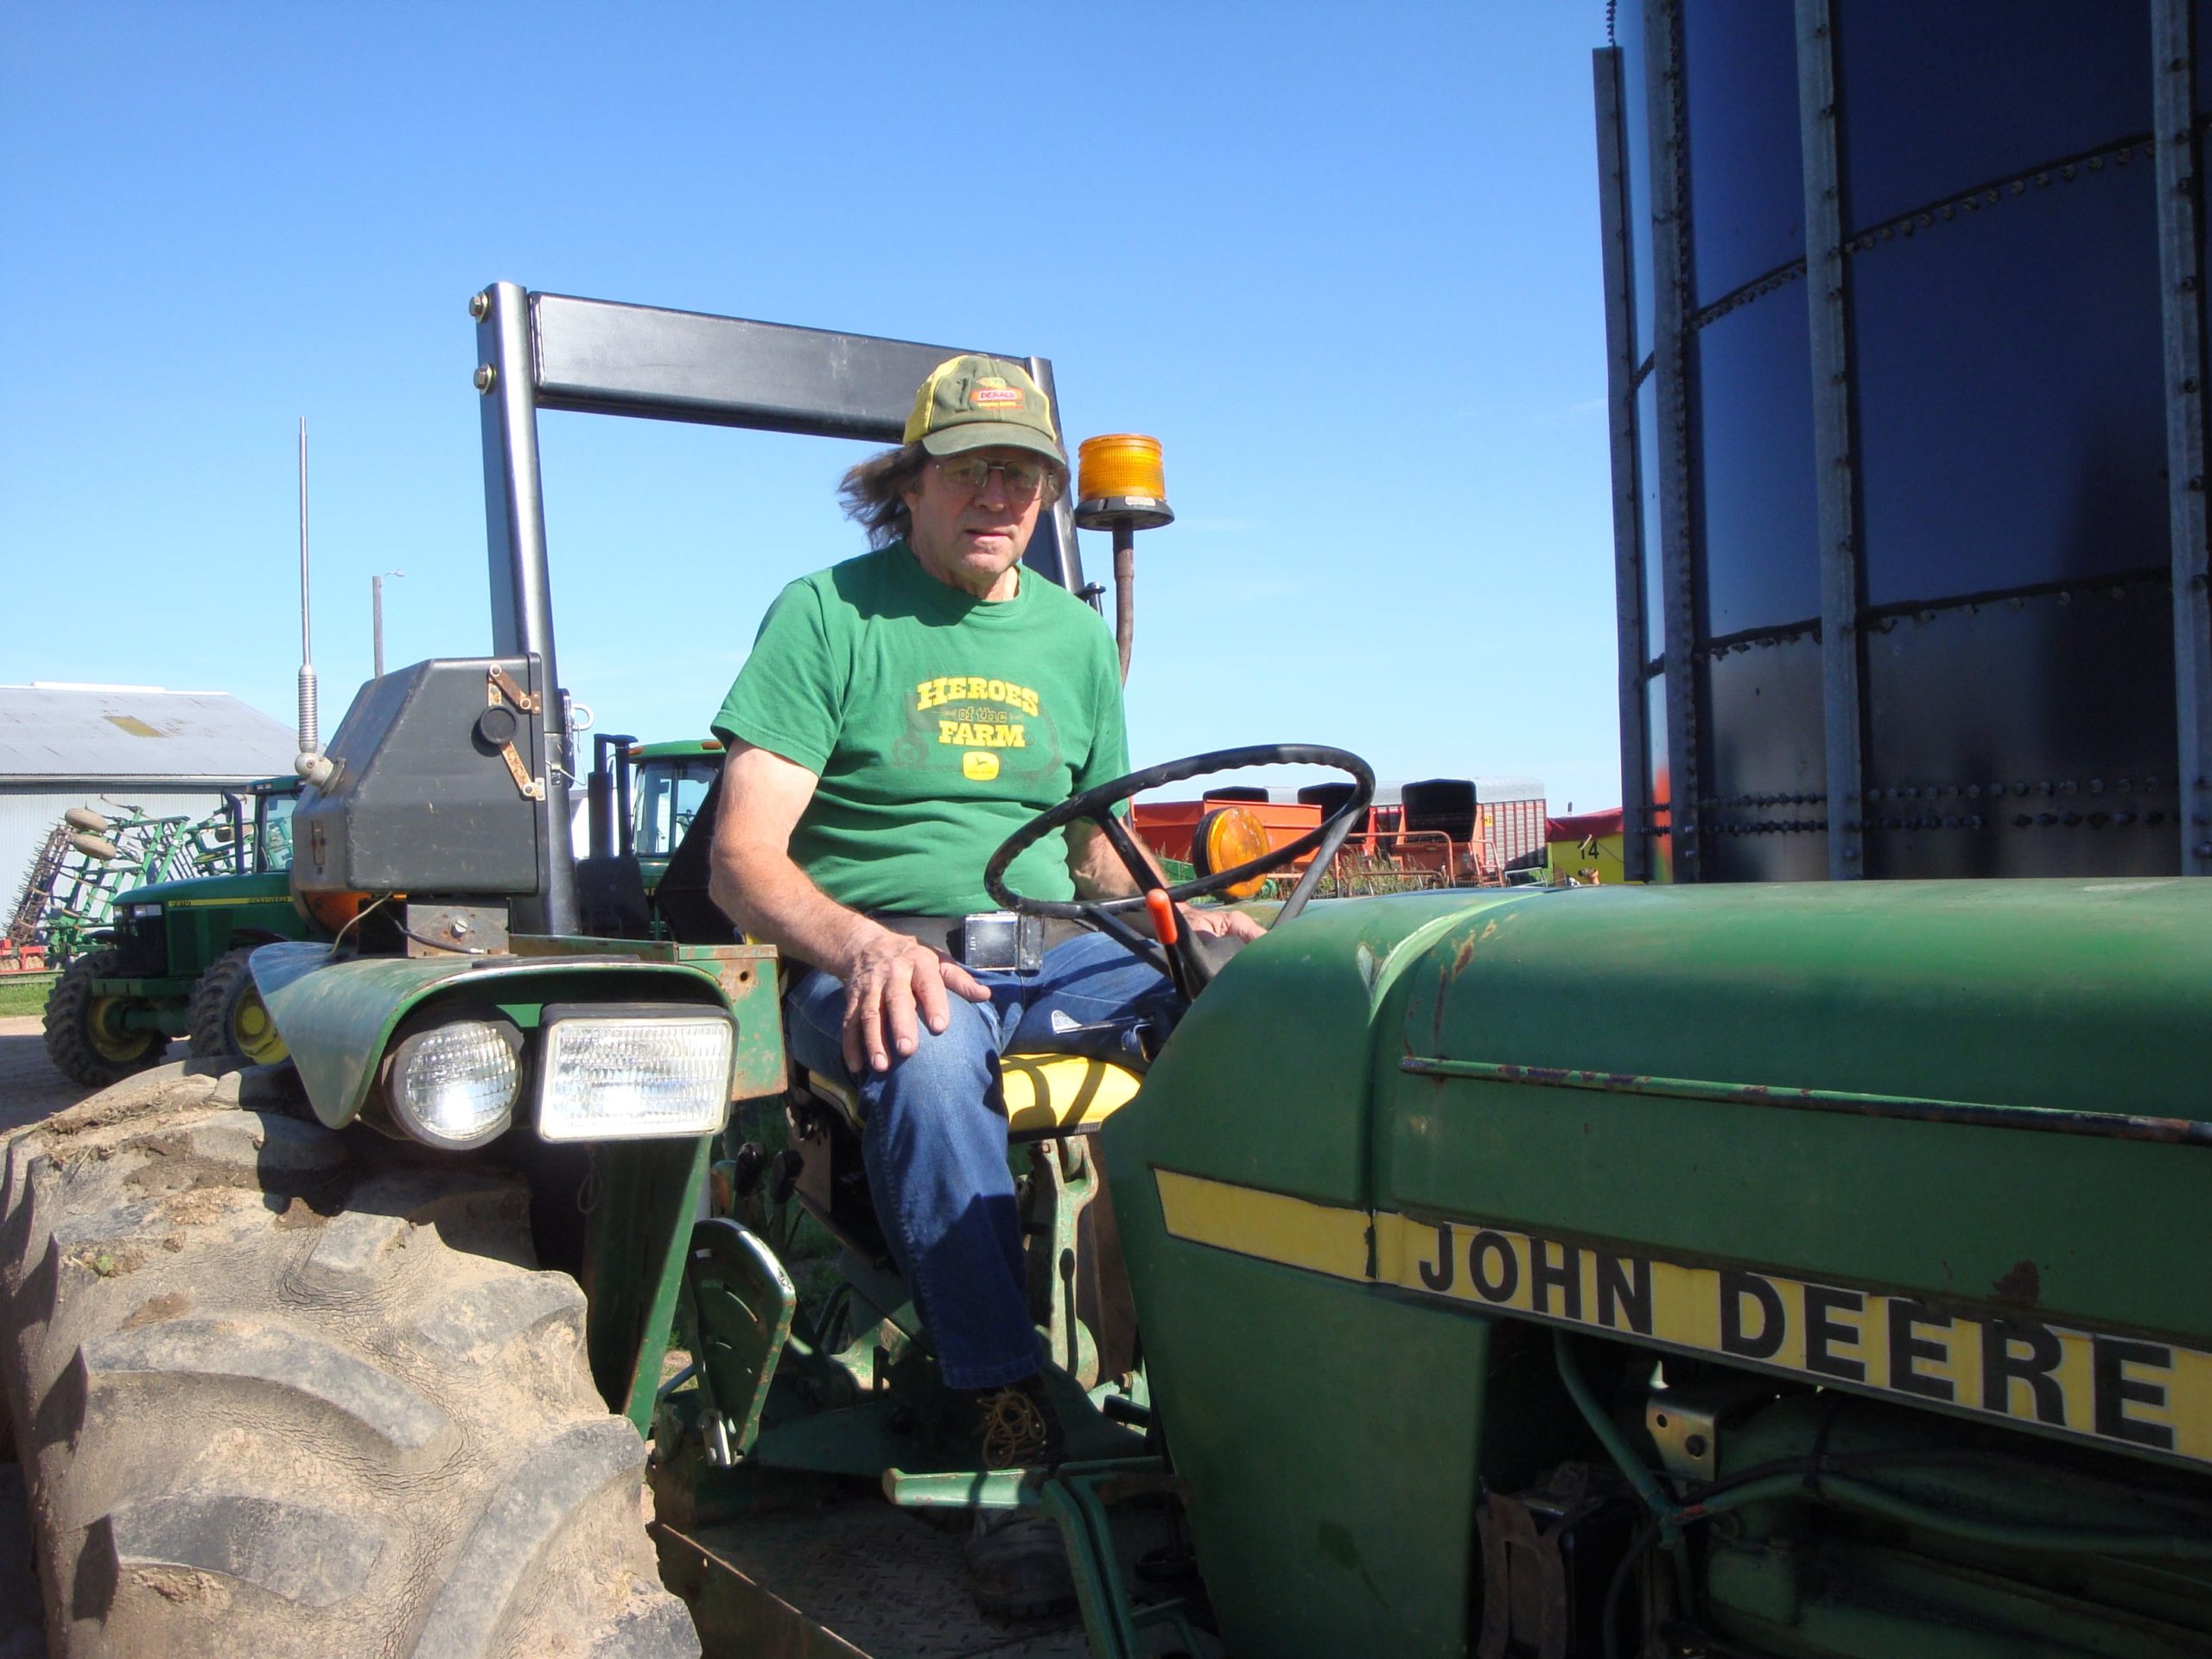 Wood County Farm Bureau member Clarence Boerboom retrofitted his John Deere 2940 through the National Farm Medicine Center Wisconsin ROPS Rebate Program. The Farm Center will hold a drawing for a free ROPS during the Wisconsin Farm Bureau Federation annual meeting, Dec. 5-6, at Kalahari Resort in Wisconsin Dells.